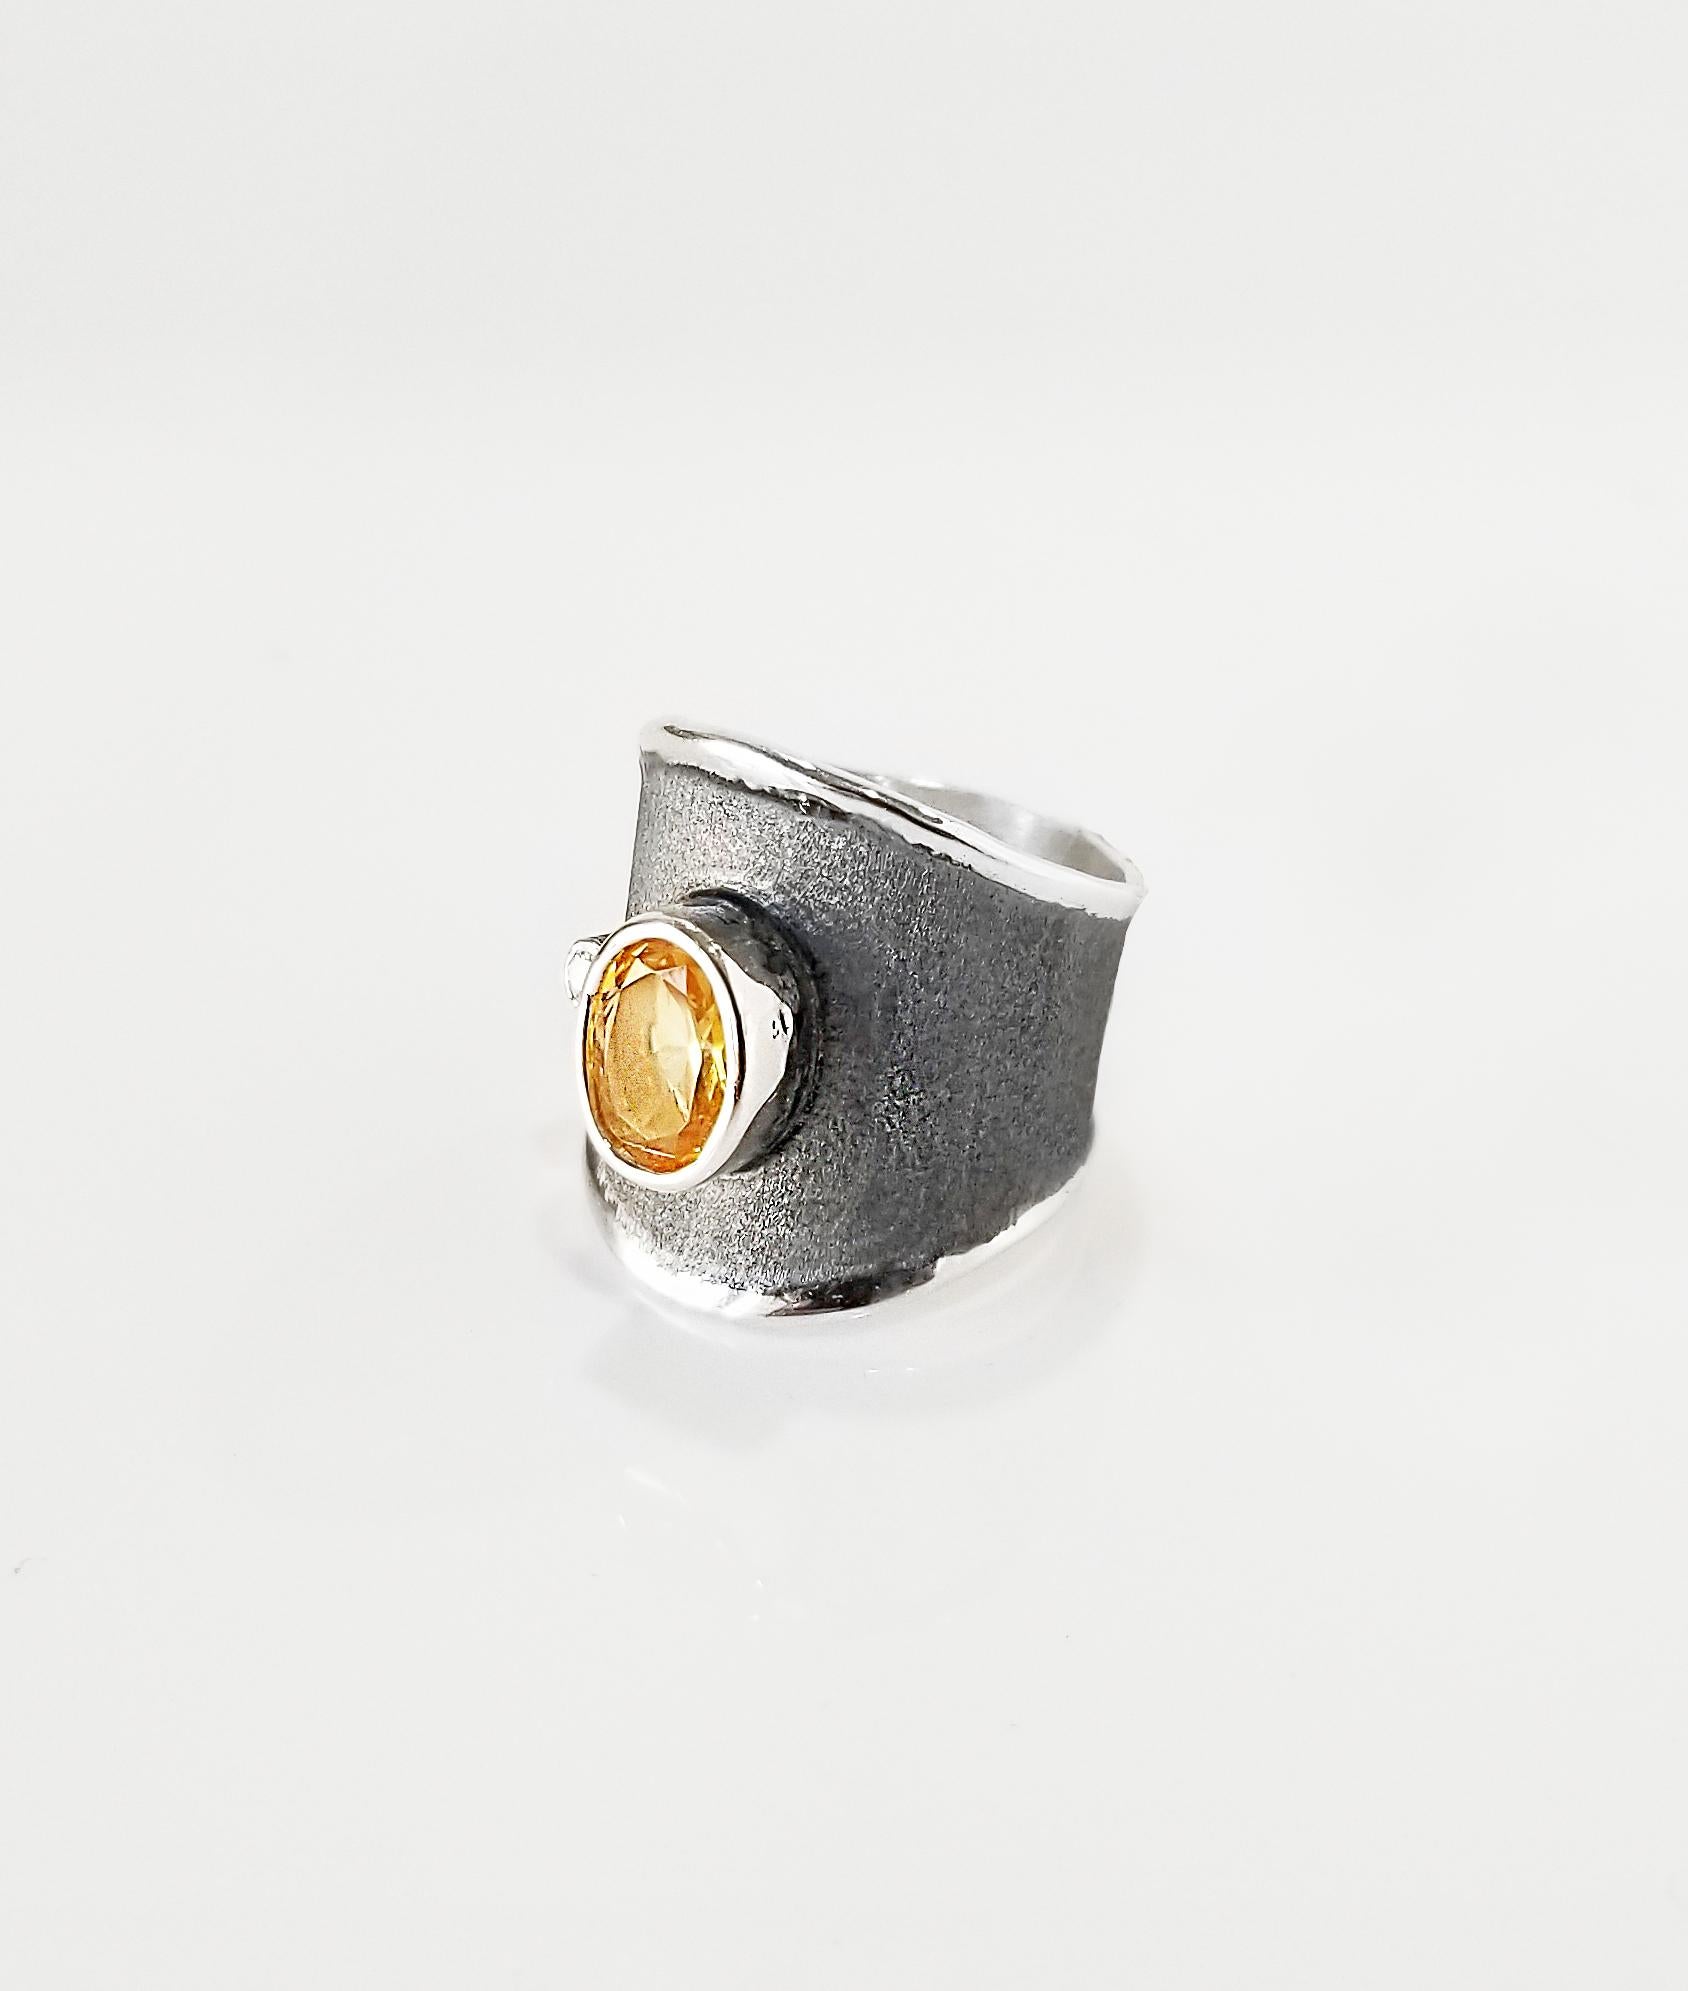 Presenting a handmade ring from Yianni Creations crafted in Greece for Hephestos Collection. This artisan ring is made from fine silver 950 purity and plated with palladium to resist the elements. The ring features 1.25 Carat citrine and 0.03 Carat